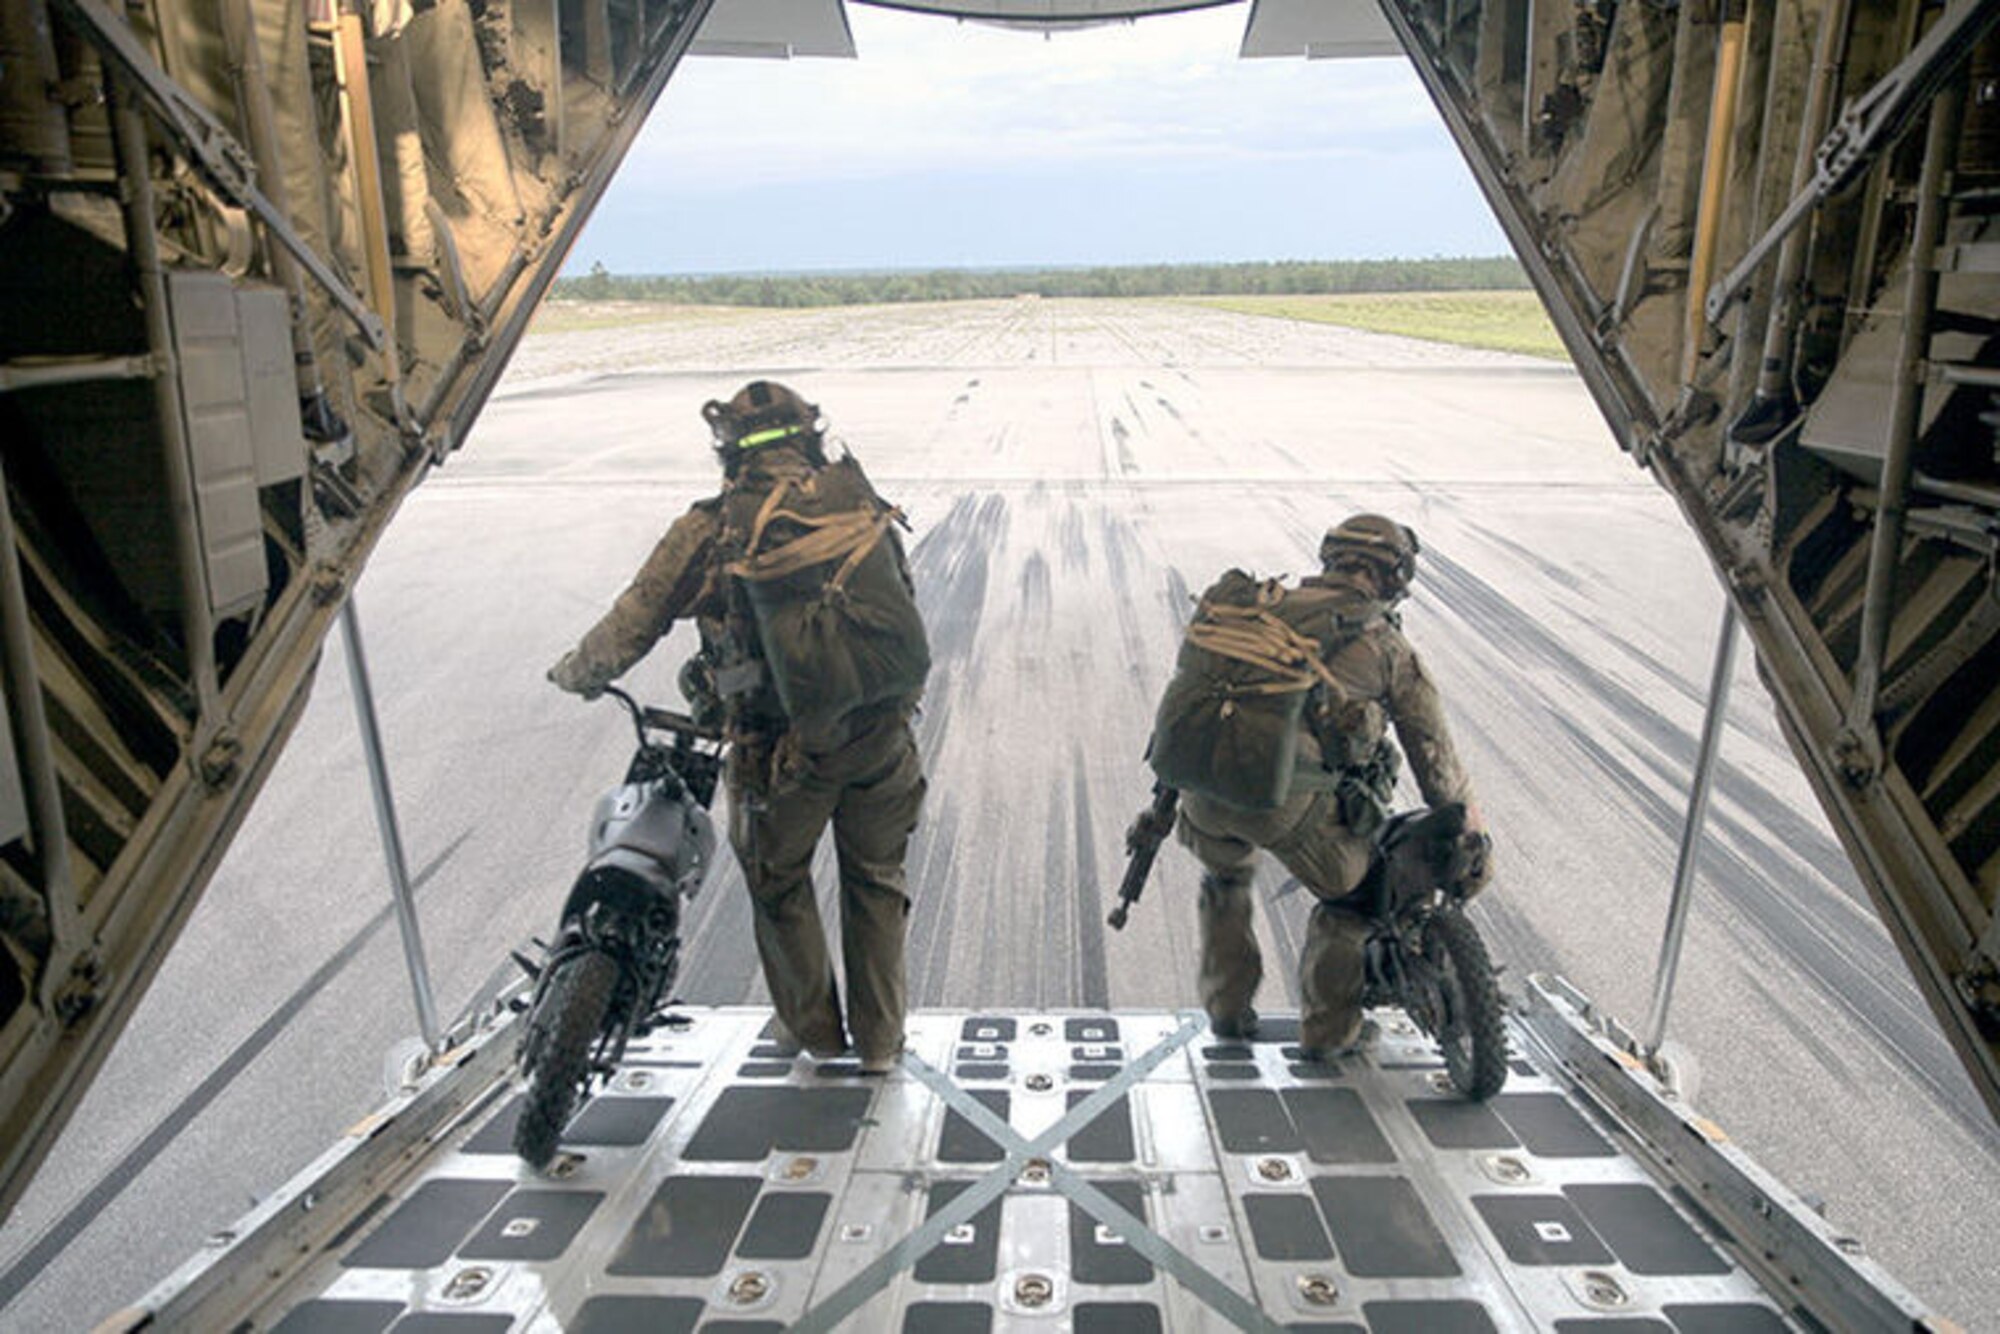 Two 123rd STS personnel off load 50 cc mini bikes to stage on a runway at an Eglin Air Force Base drop zone, prior to a static line jump and jump clearing team mission from a KC-130J Super Hercules belonging to Marine Aerial Refueler Transport Squadron 252, during Emerald Warrior 2015, April 28, 2015. The mini bikes are used to patrol down the air strip before the plane lands to ensure there is no debris or hostile forces near the landing zone. Emerald Warrior is a joint exercise led by Air Force Special Operations Command that provides pre-deployment training for U.S. and partner nation special operations forces and interagency elements.